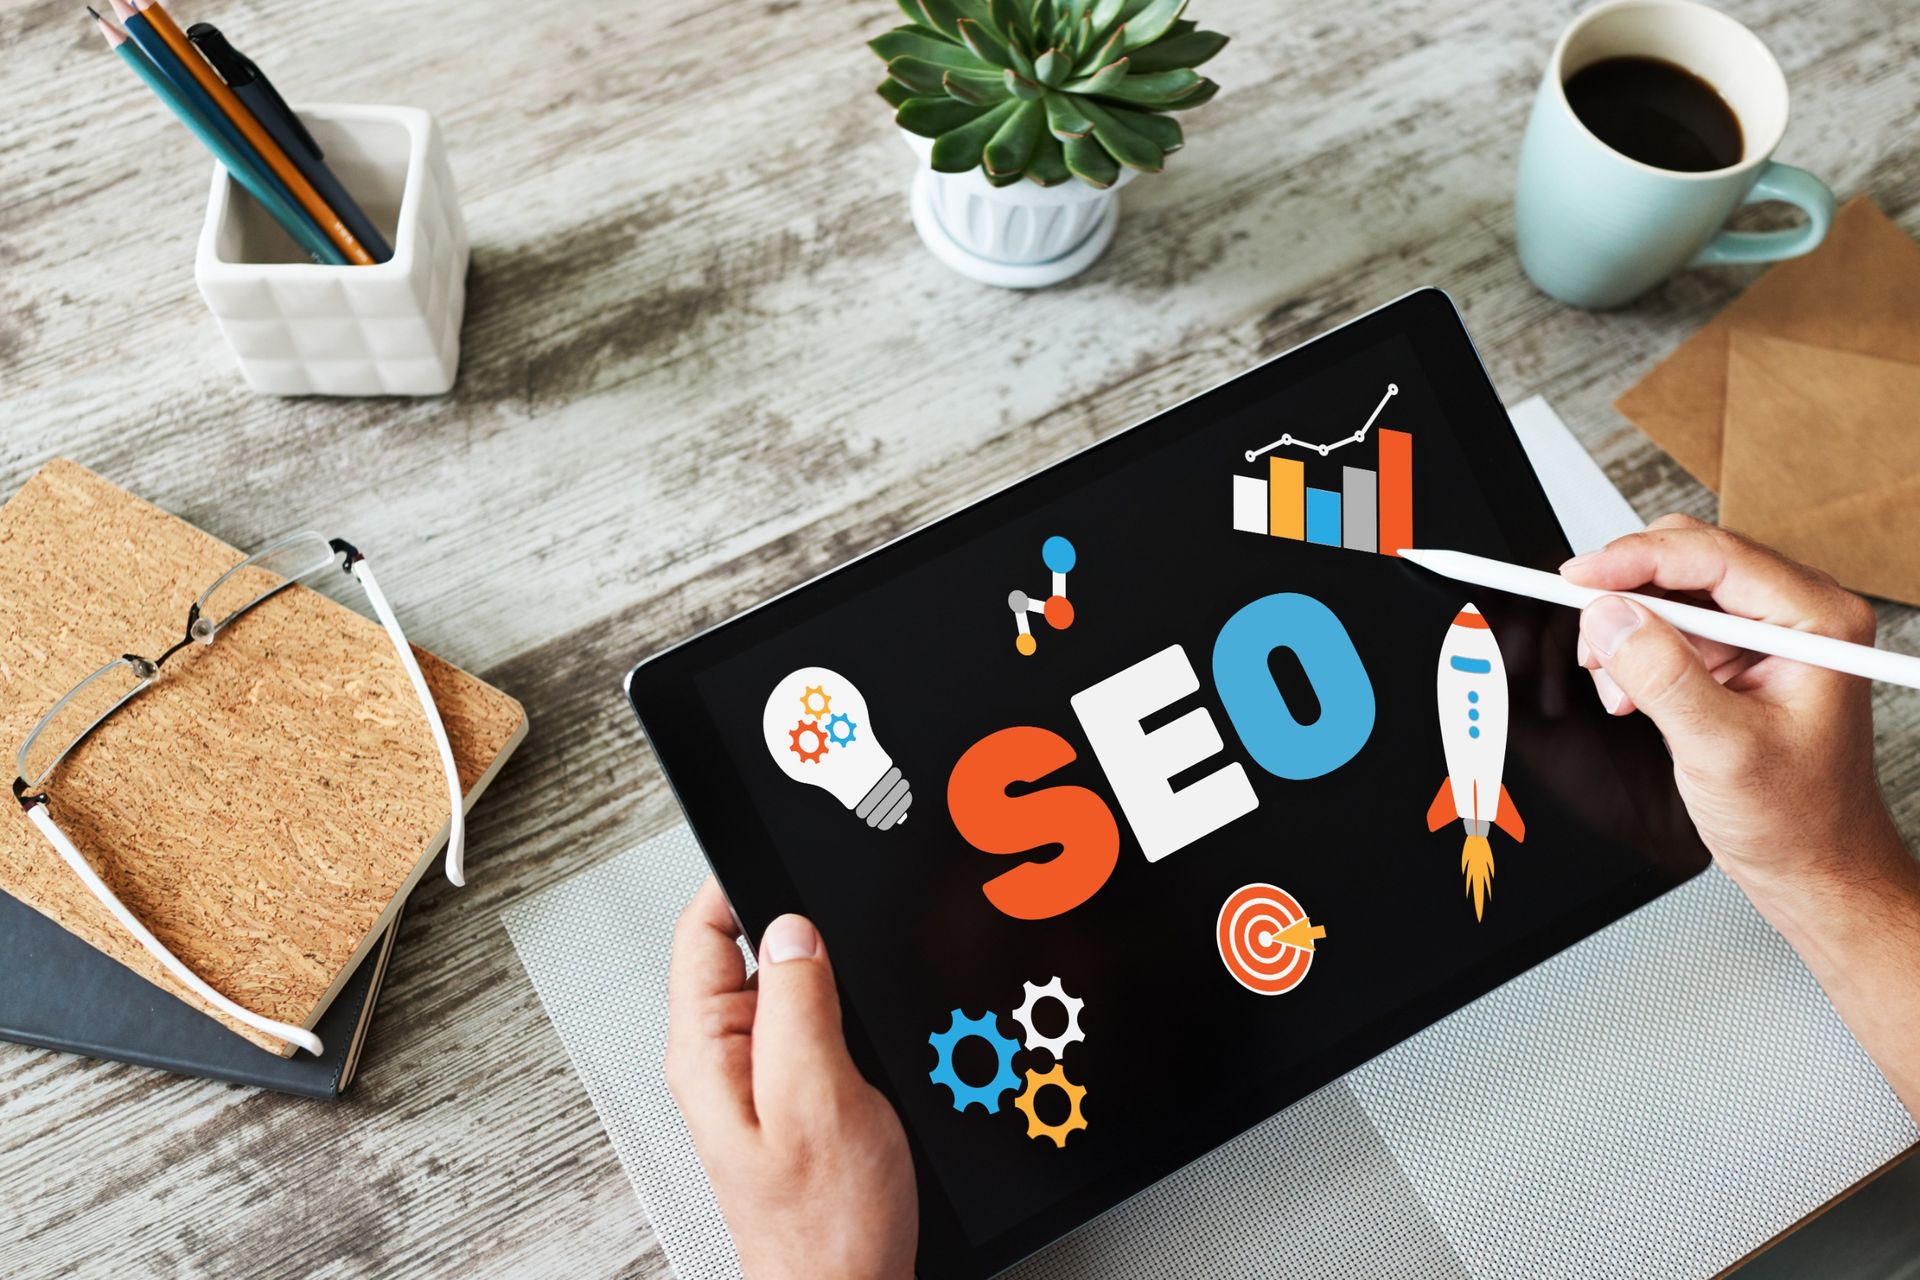 Why SEO Is Important For Your Business